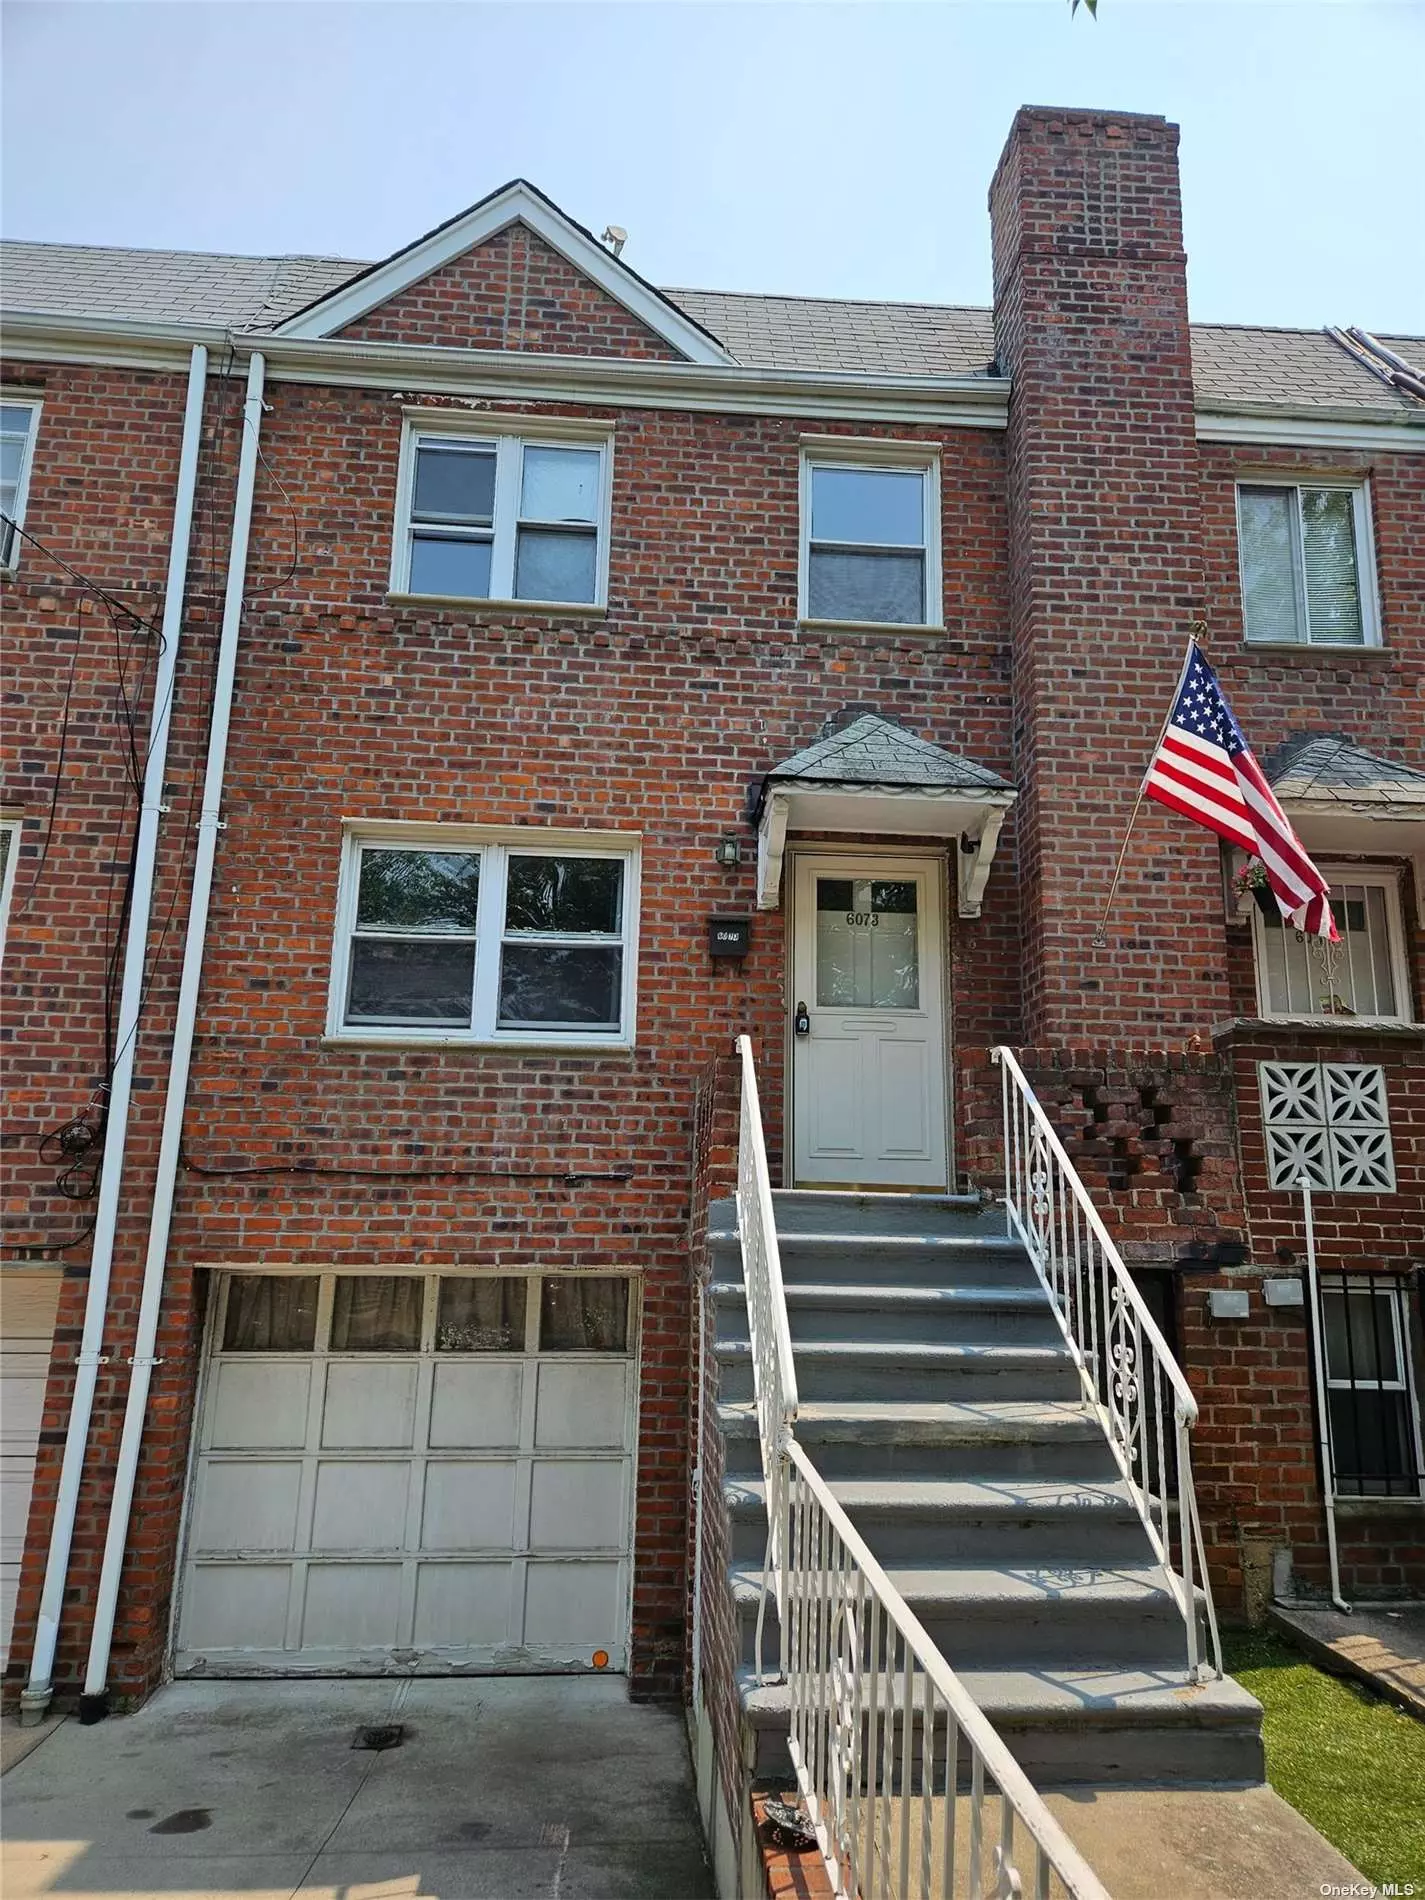 Brick 1 family brick home on the border of Middle Village and Maspeth. 3 bedrooms, 1.5 baths, attached garage with private yard. This home needs work but you can make it your dream home with your own touch.